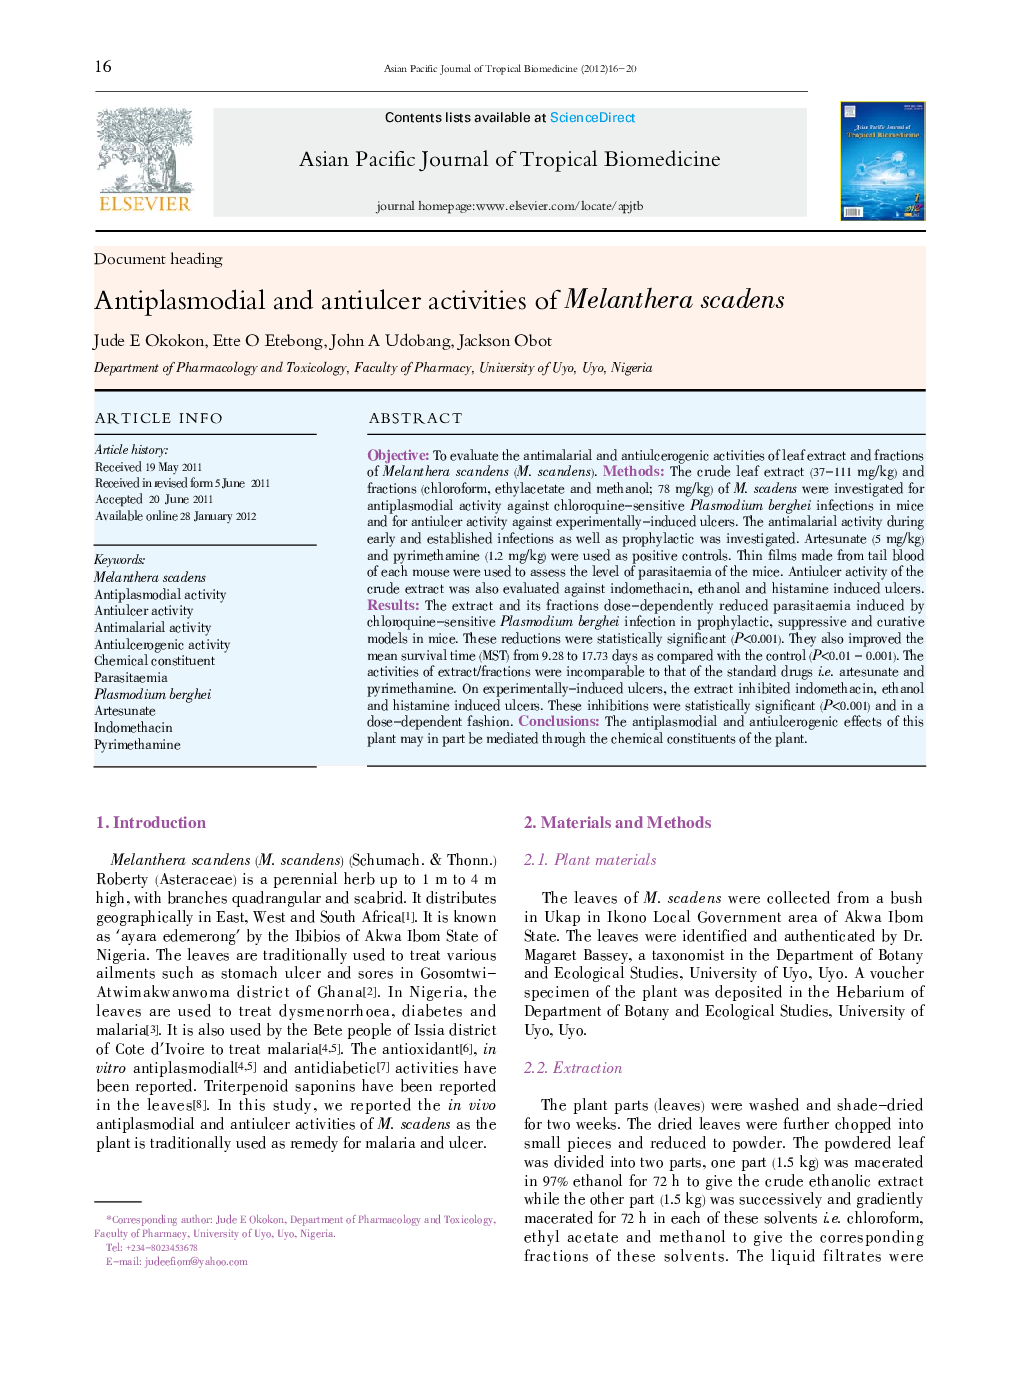 Antiplasmodial and antiulcer activities of Melanthera scadens